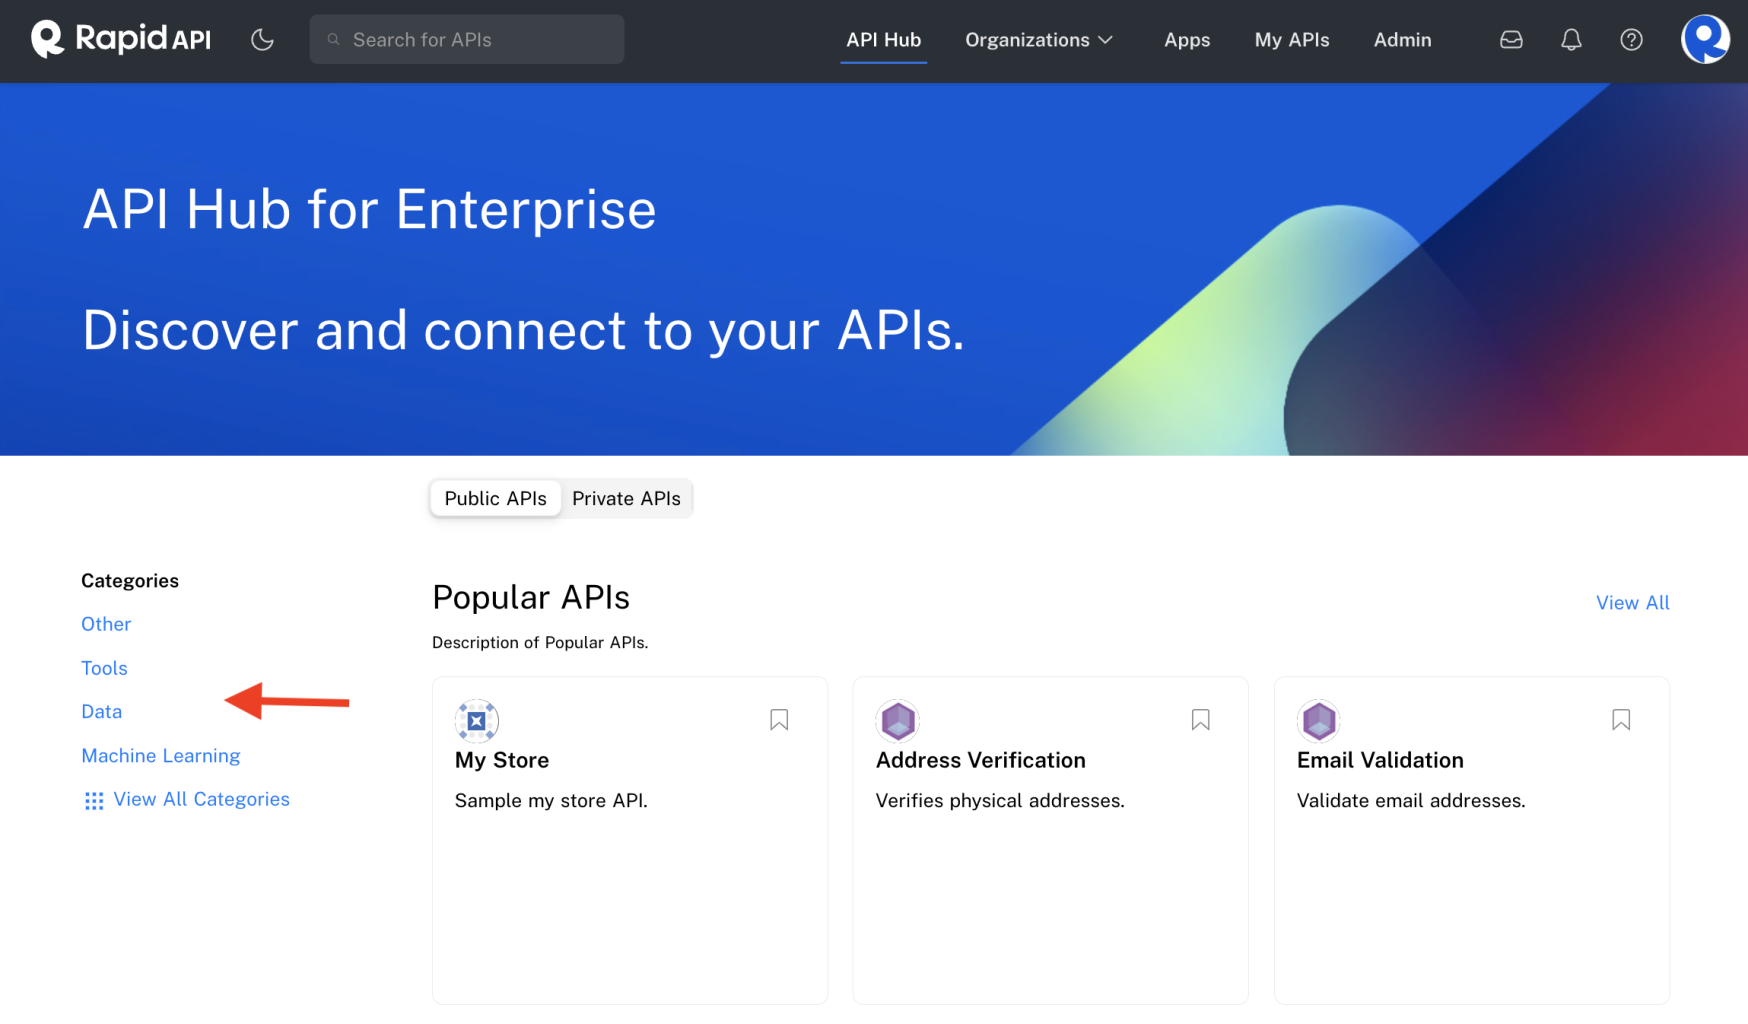 Viewing categories on the API Hub page.